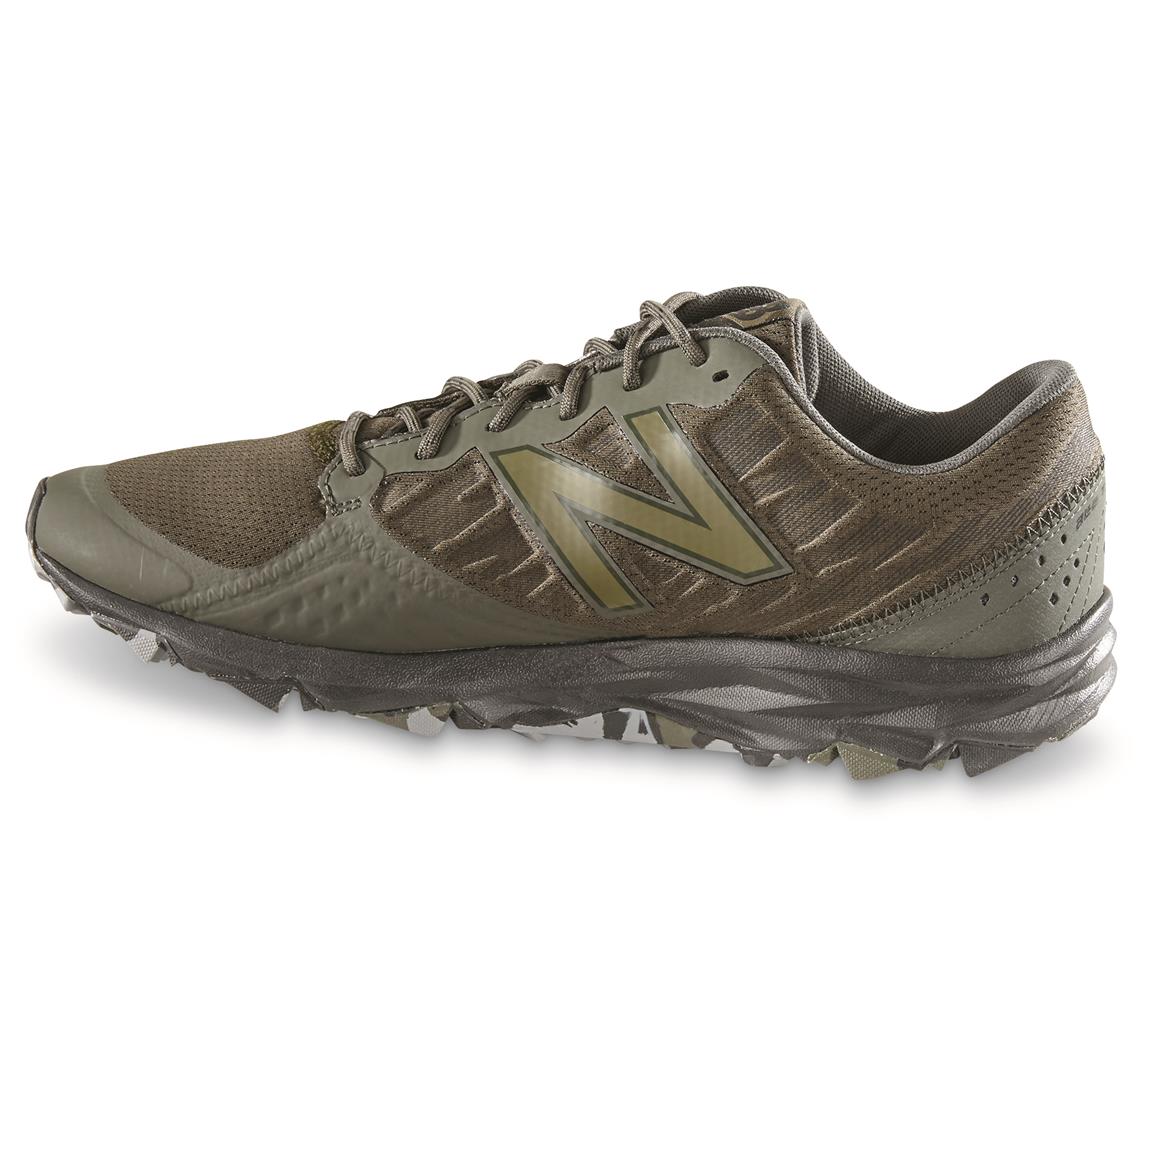 Outside view � Toe Protect � Built for Speed! New Balance Men\u0027s T690v2  Trail Running Shoes ...